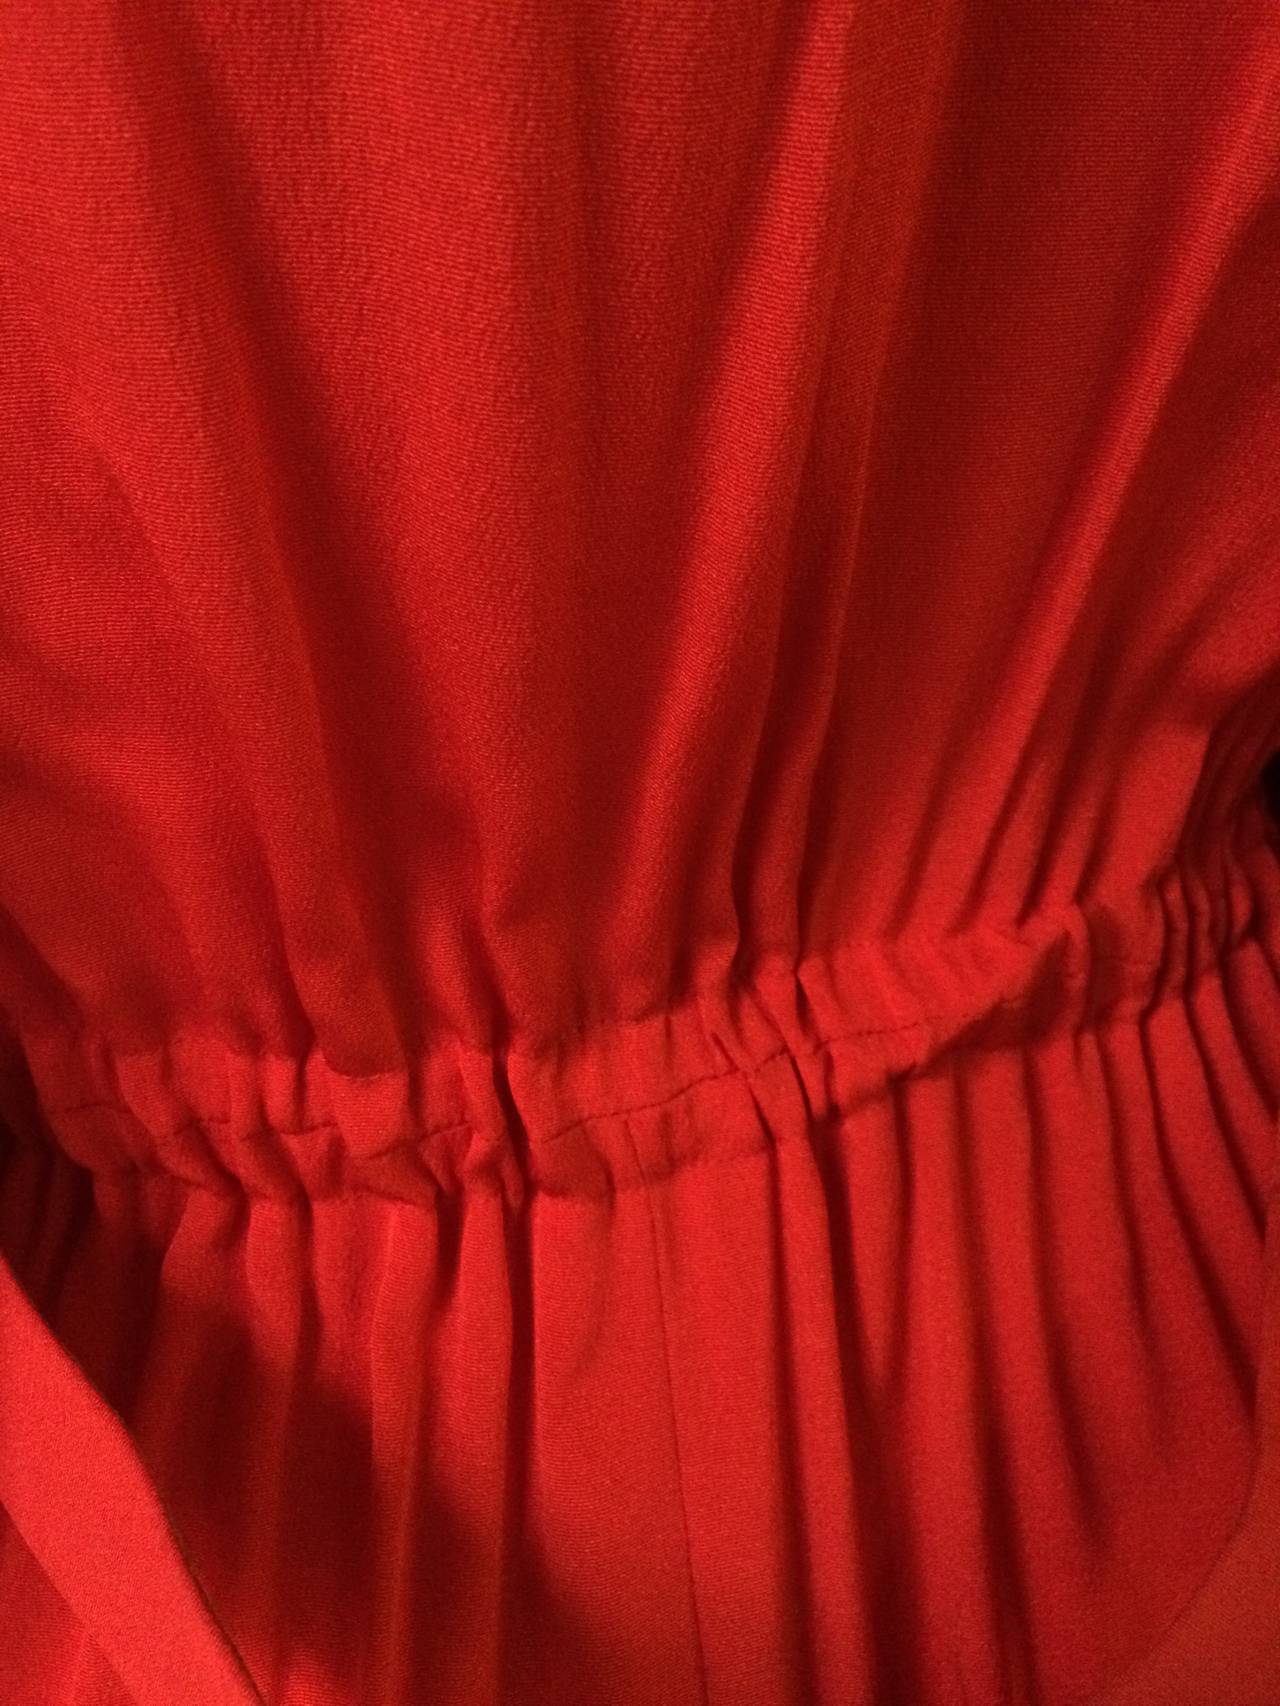 Geoffrey Beene 1960s Red Silk Maxi Dress with Pockets Size 4/6. For Sale 5